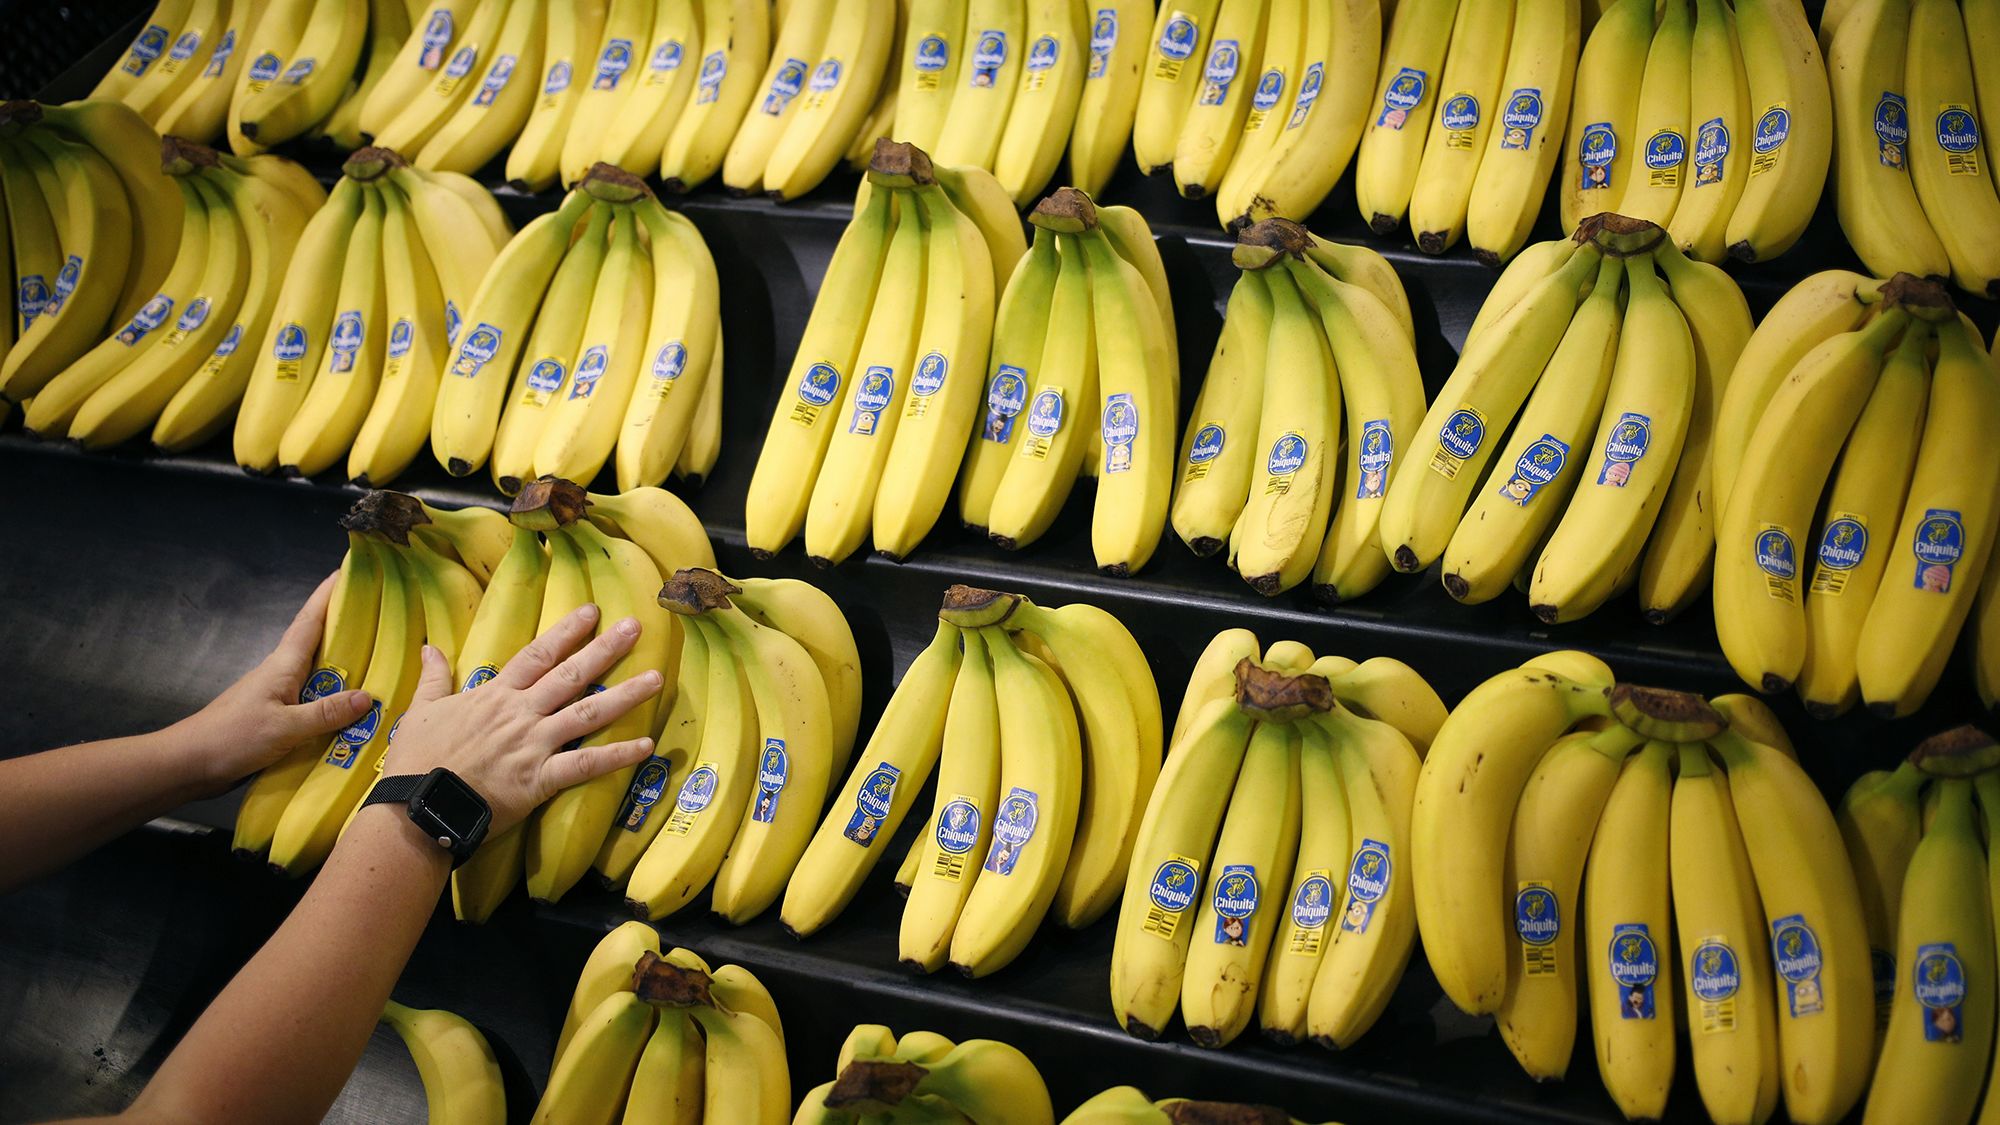 Chiquita found liable for financing paramilitary group